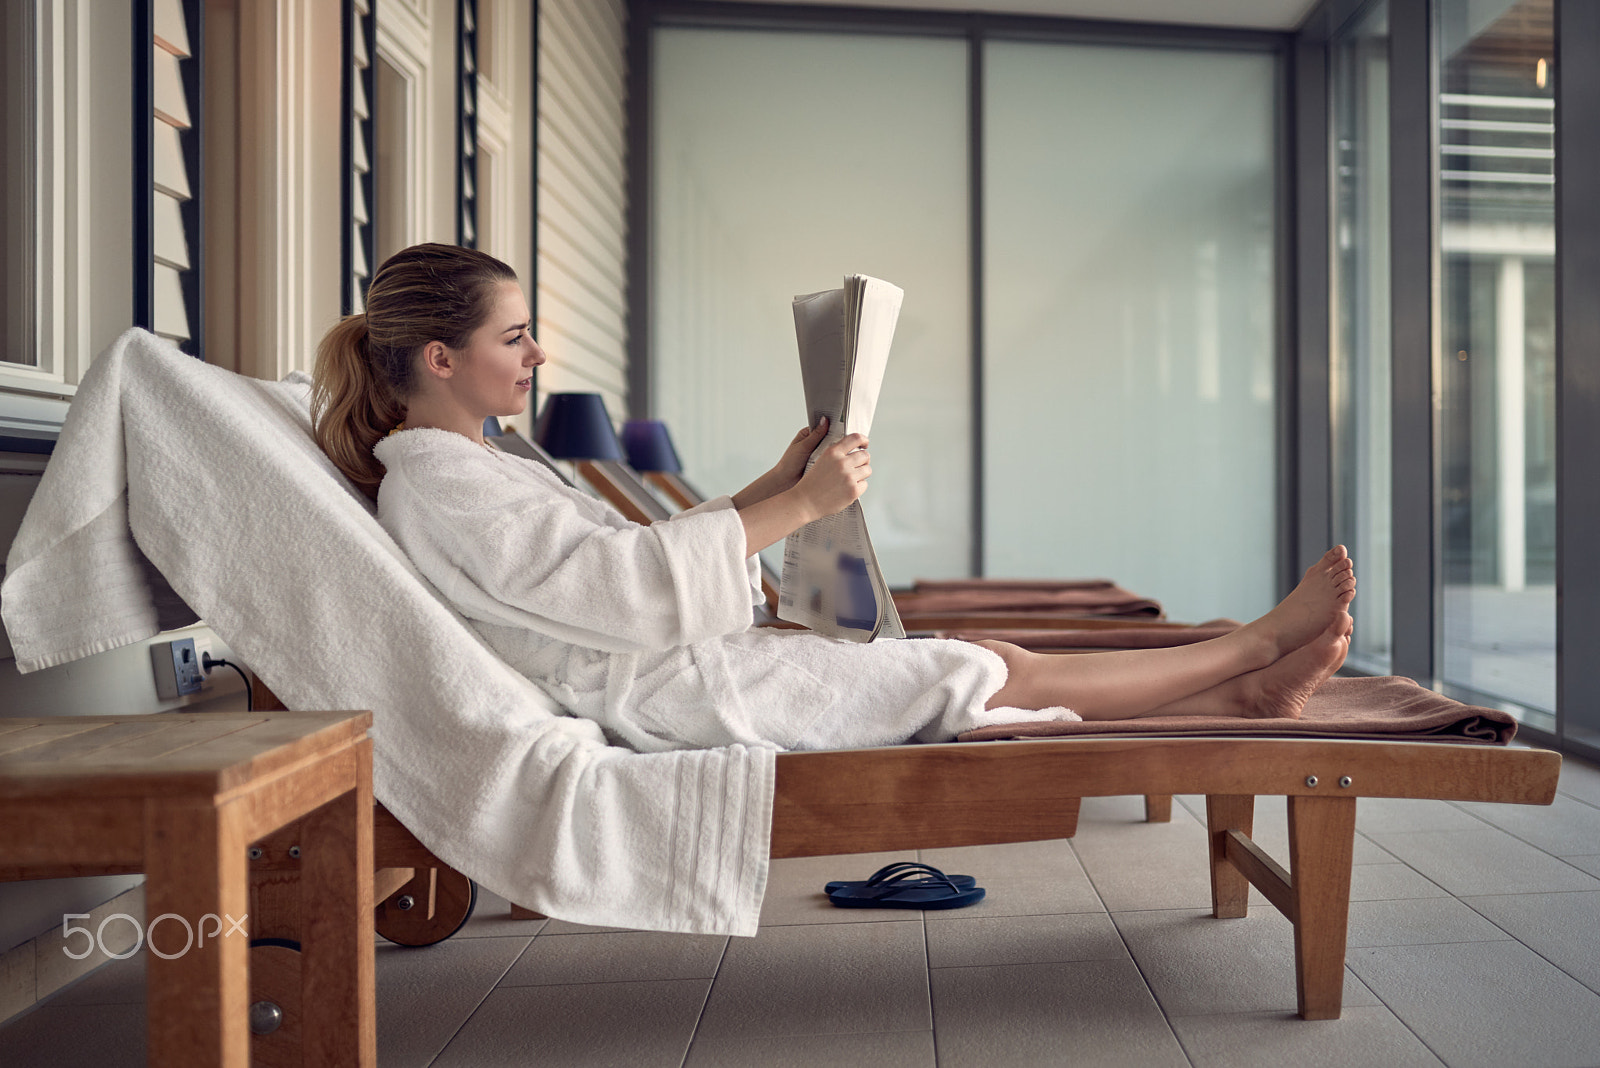 Nikon D800 sample photo. Young woman relaxing at a spa after a treatment photography